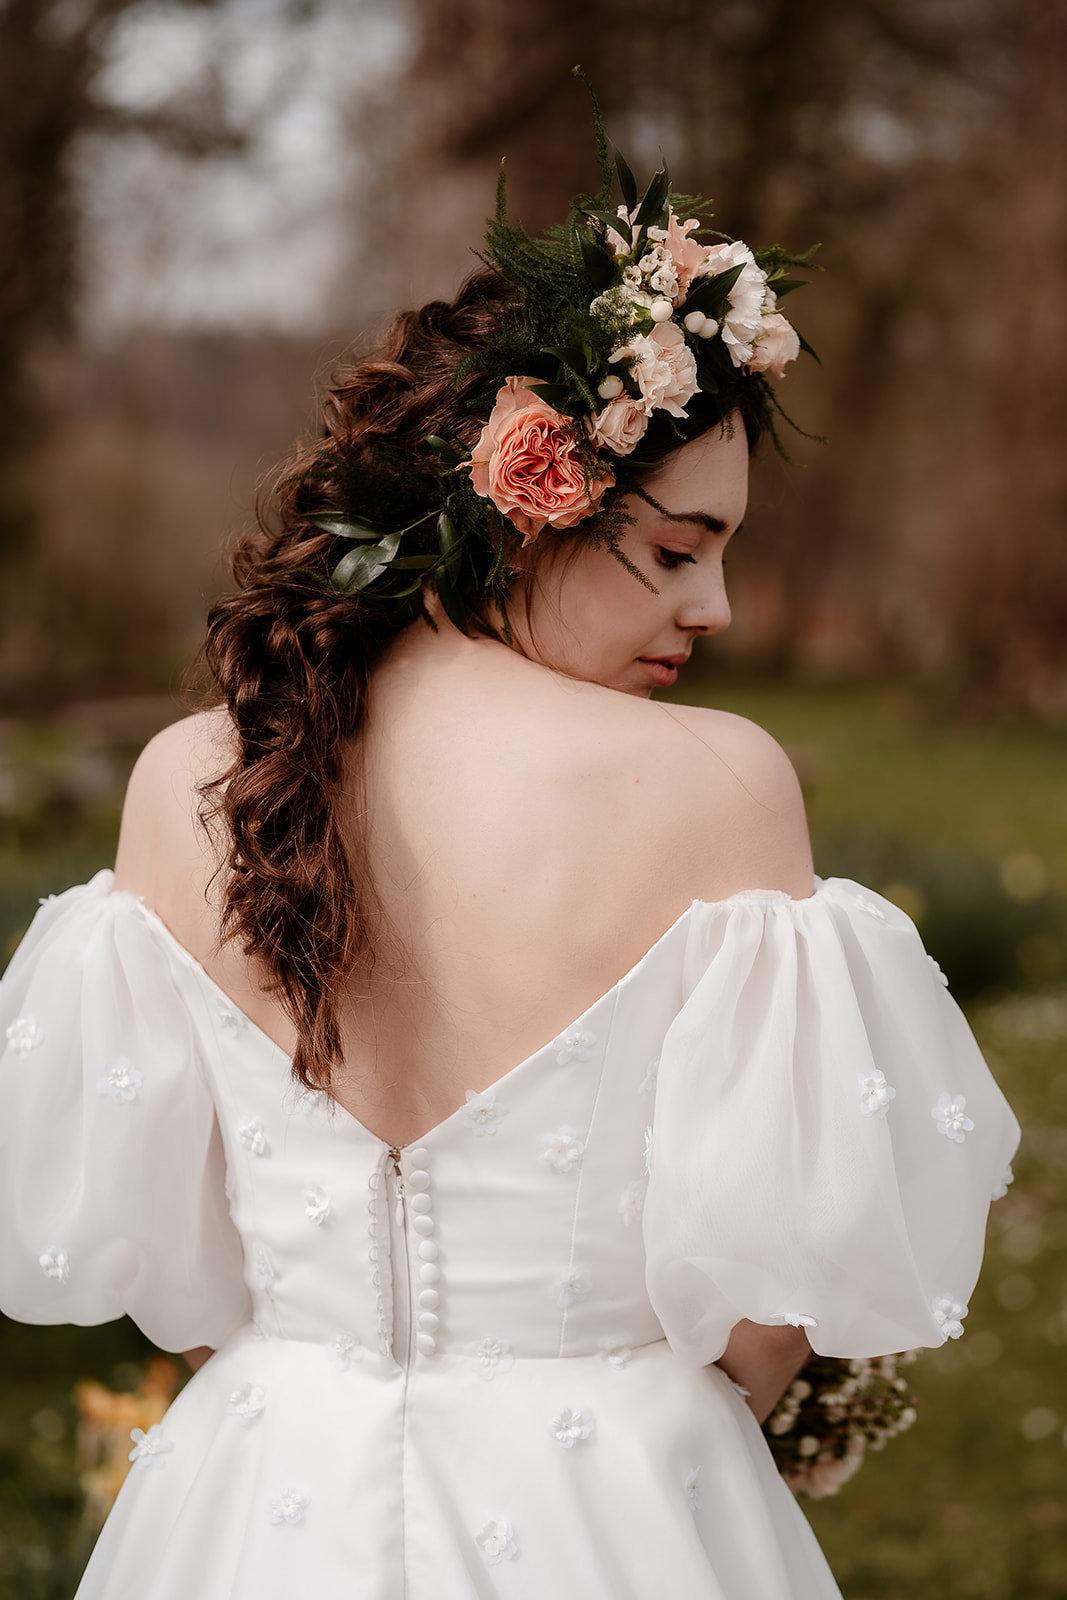 A bride wearing a flower crown looks down at her dress's puff sleeves while her soft braid falls down her back